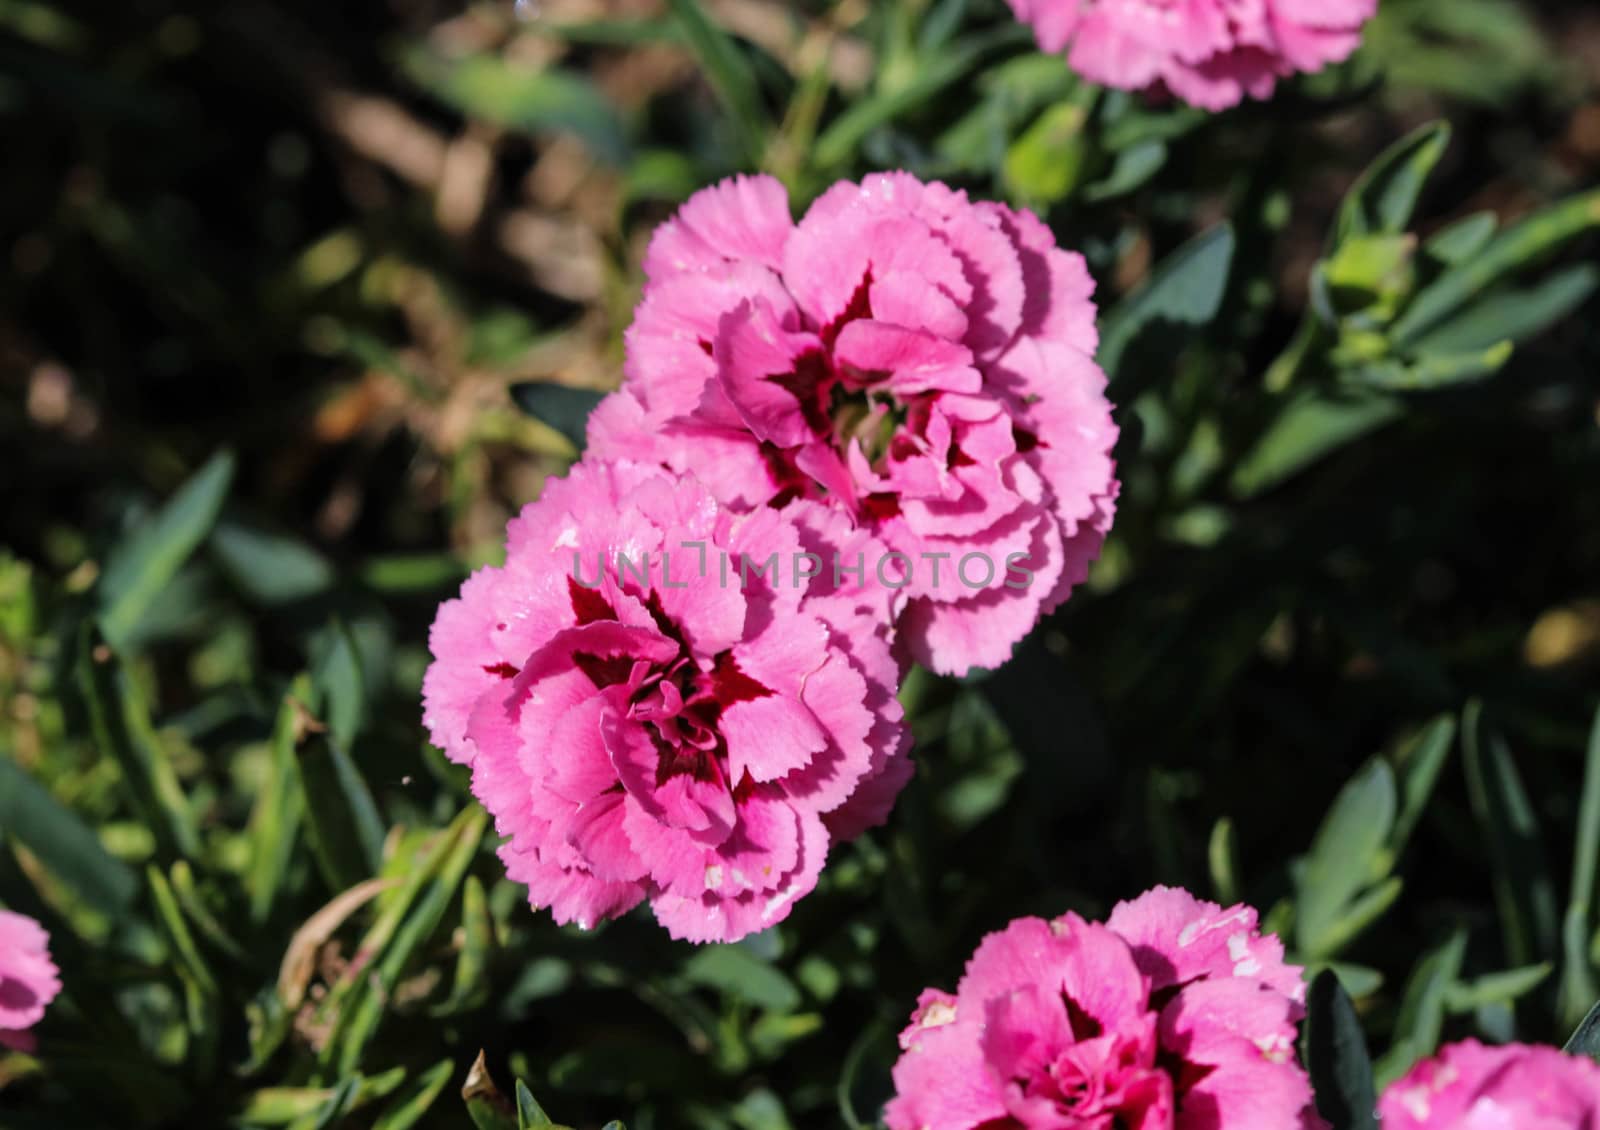 close up of Dianthus caryophyllus, commonly known as the carnation or clove pink, is a species of Dianthus. This flower is blooming in spring in a garden